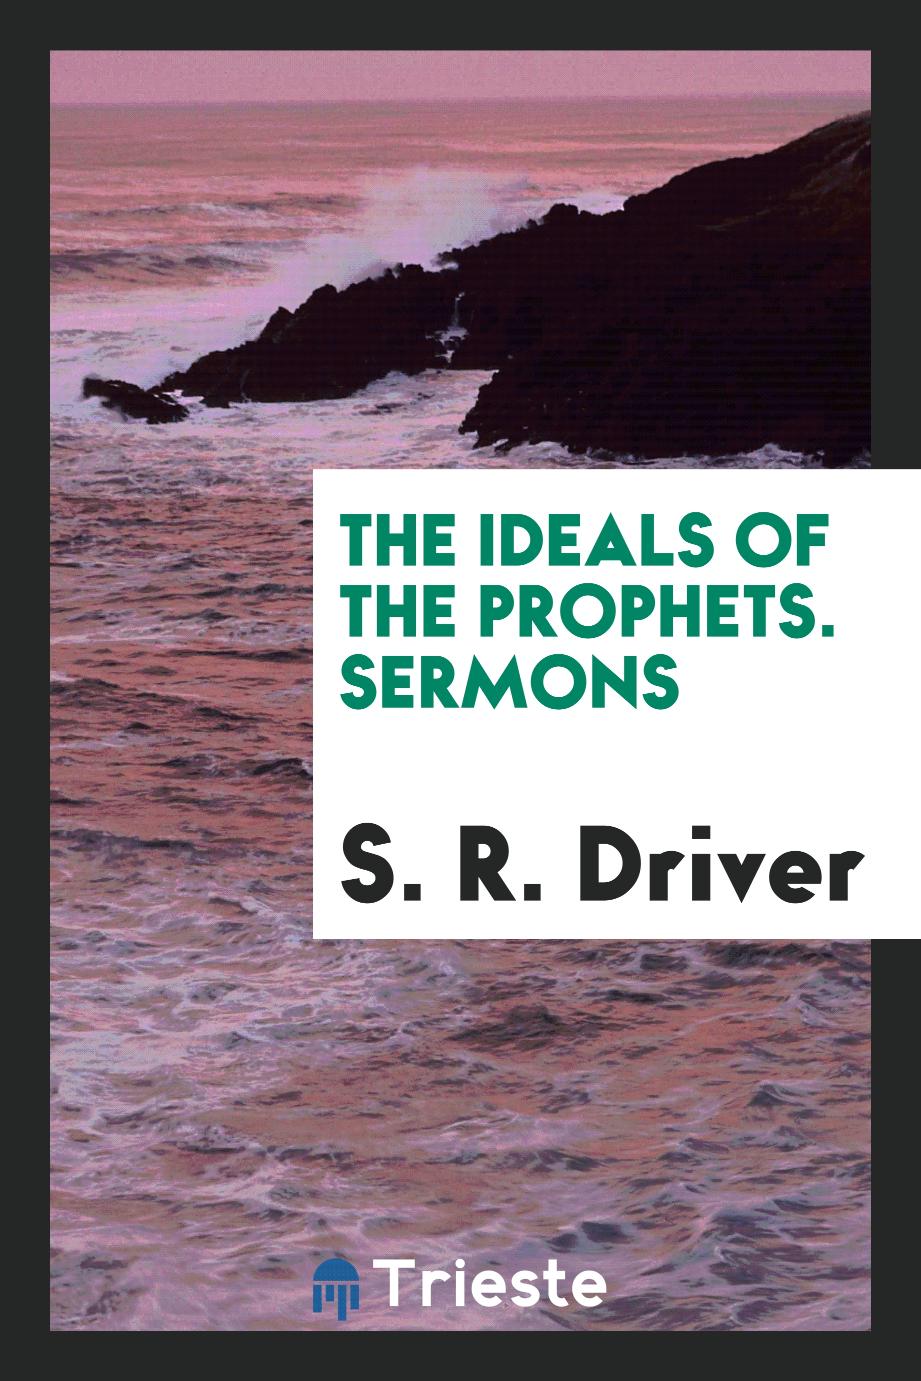 The ideals of the prophets. Sermons